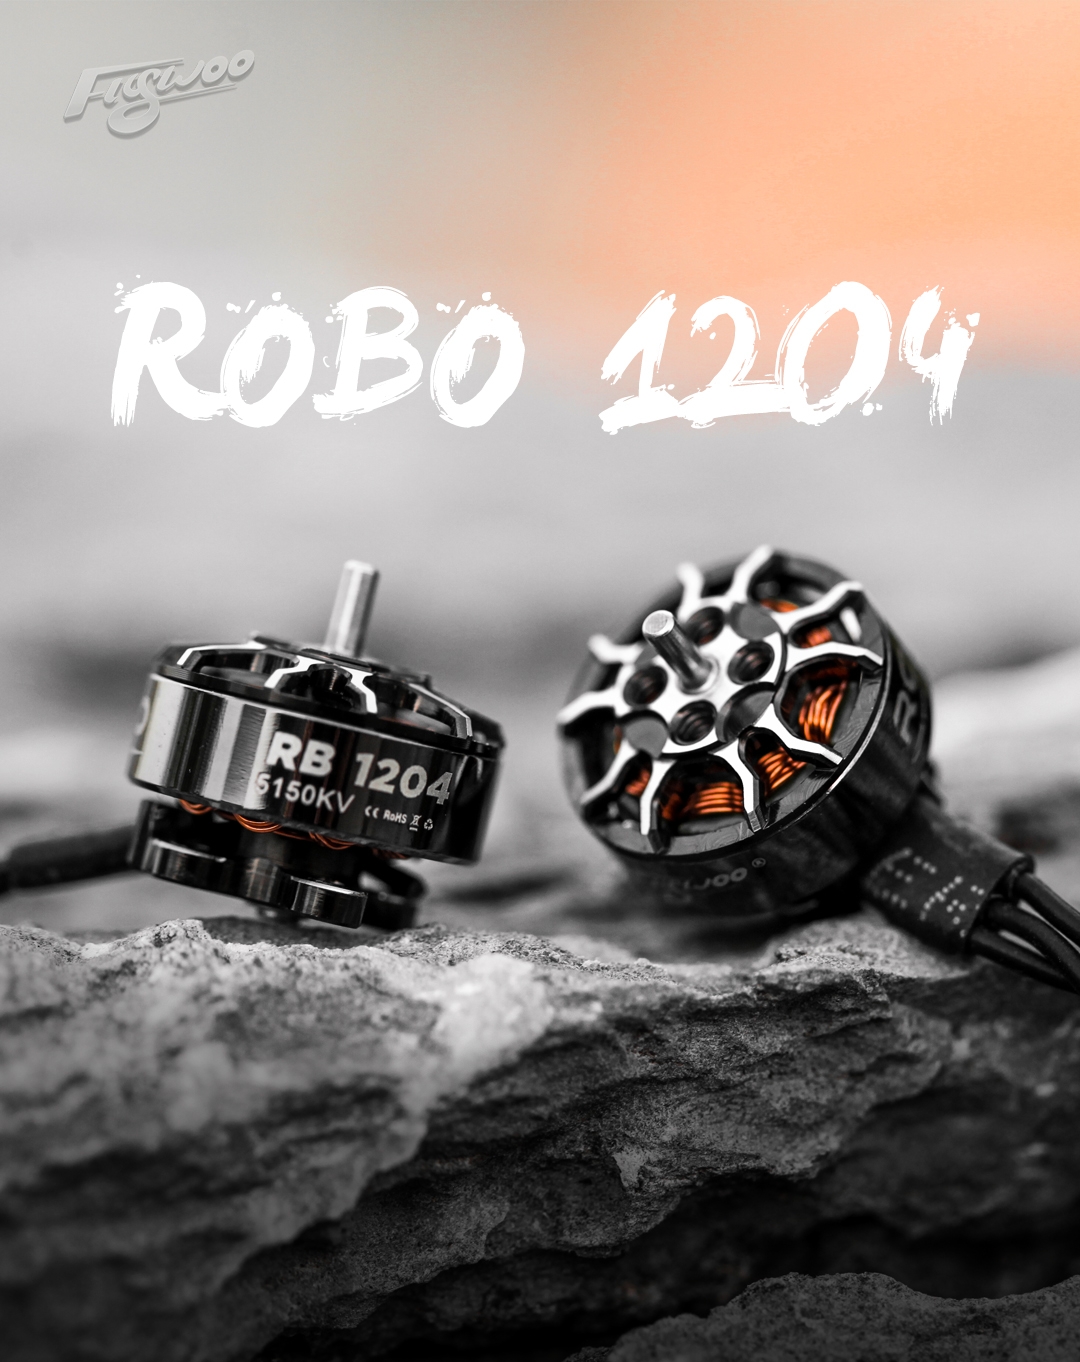 4 PCS Flywoo ROBO RB 1204 5150KV 3-4S / 8150KV 2-3S Brushless Motor for toothpick Whoop RC Drone FPV Racing